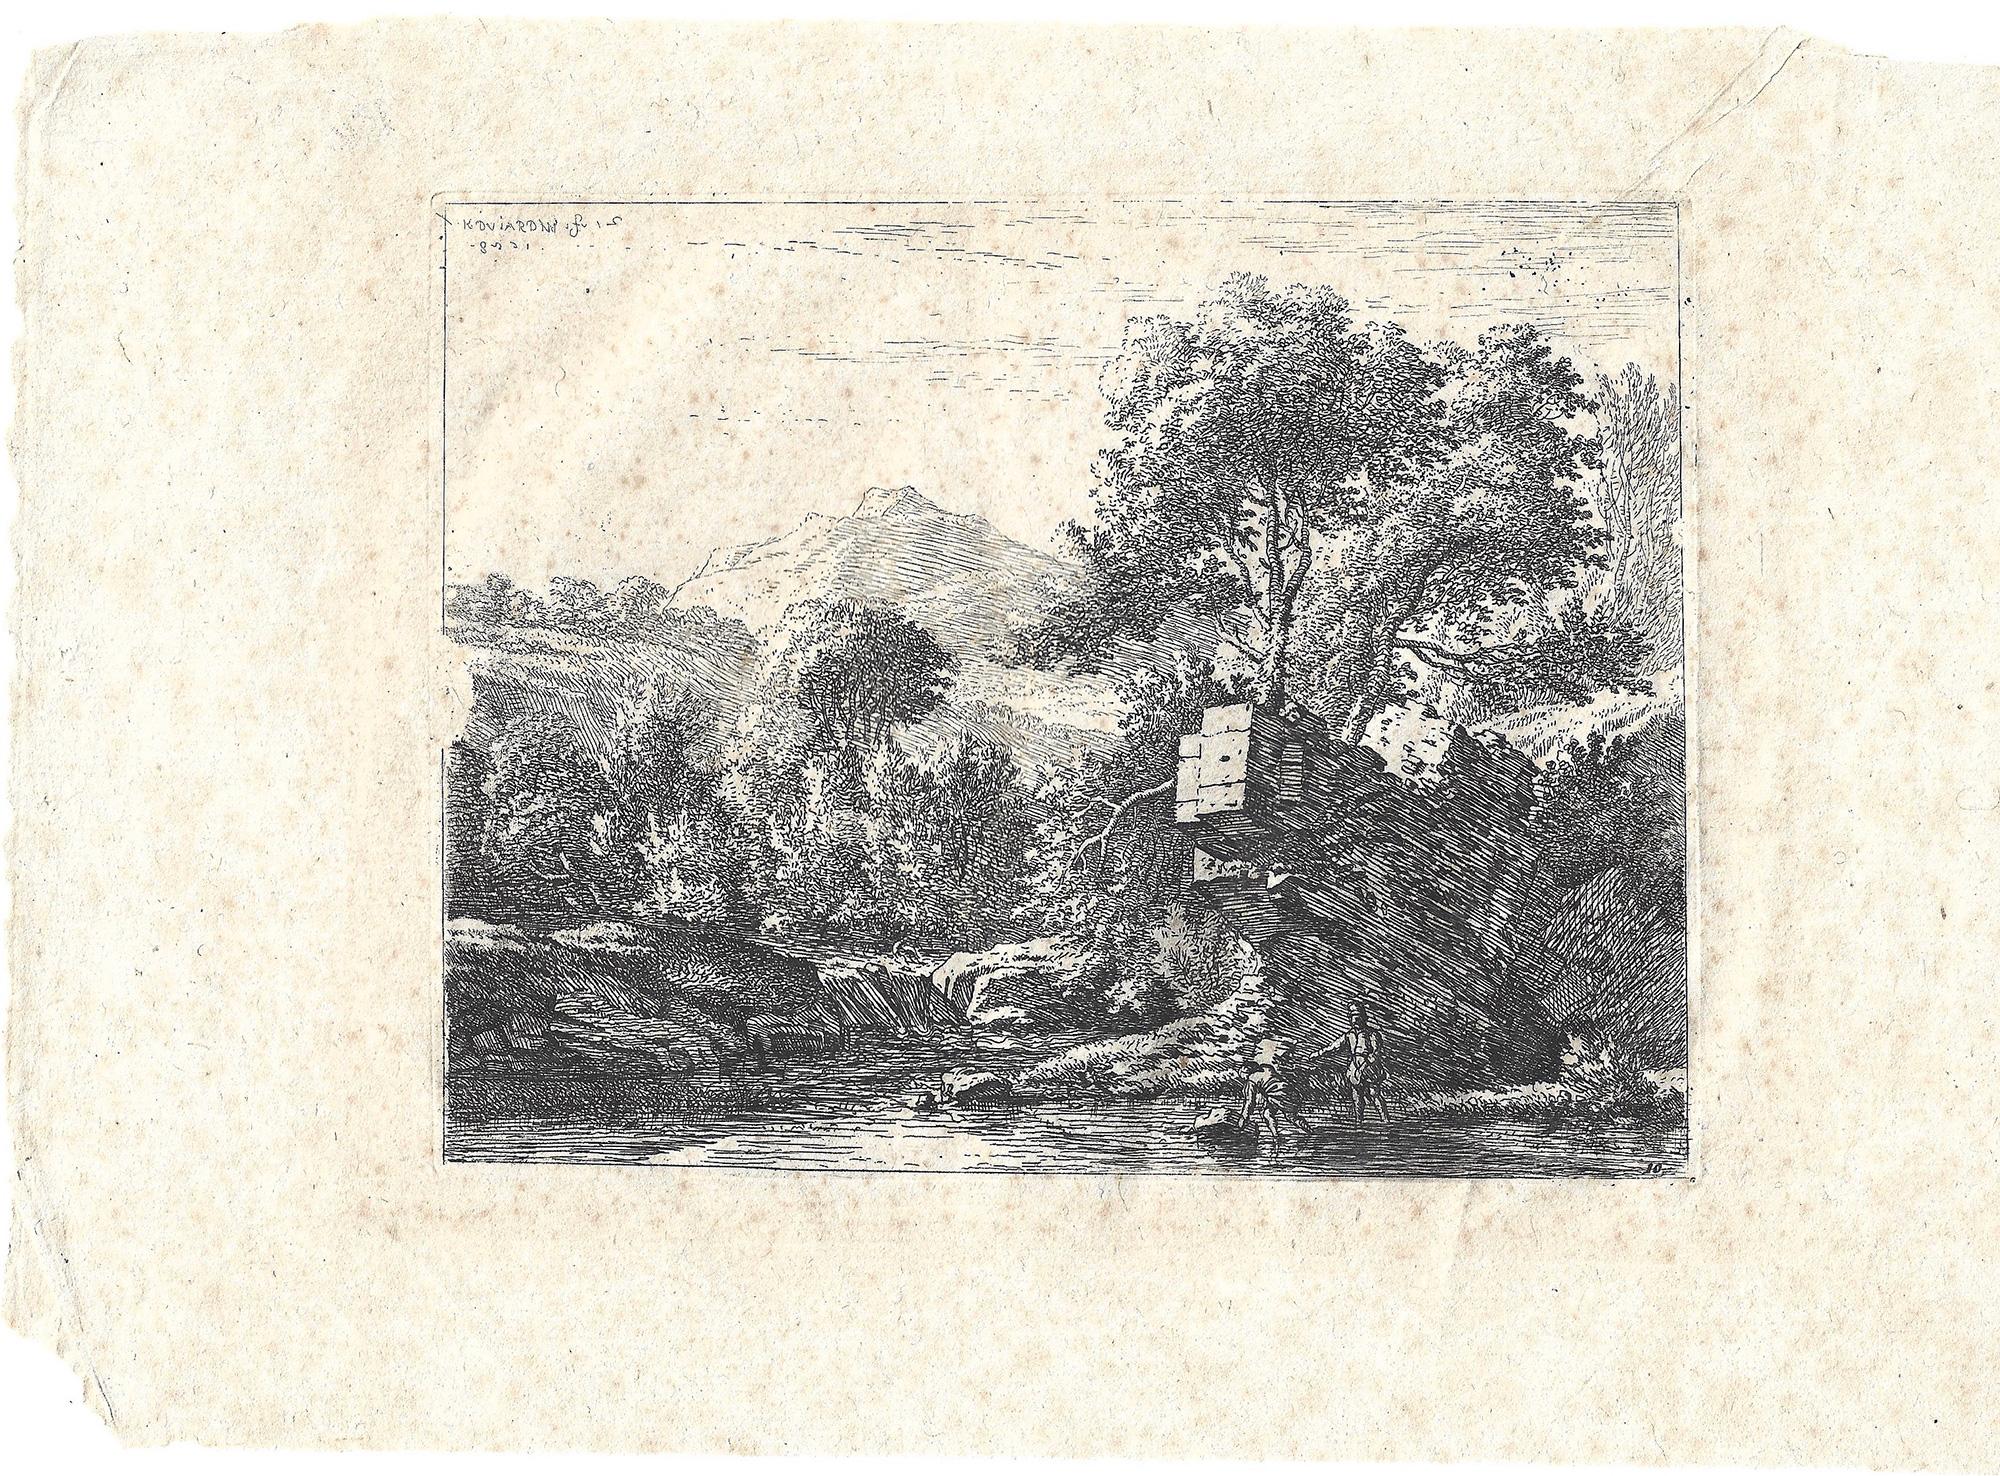 Two men standing ankle-deep in a body of water, rocky outcrop ... hilltop - Print by Karel Dujardin